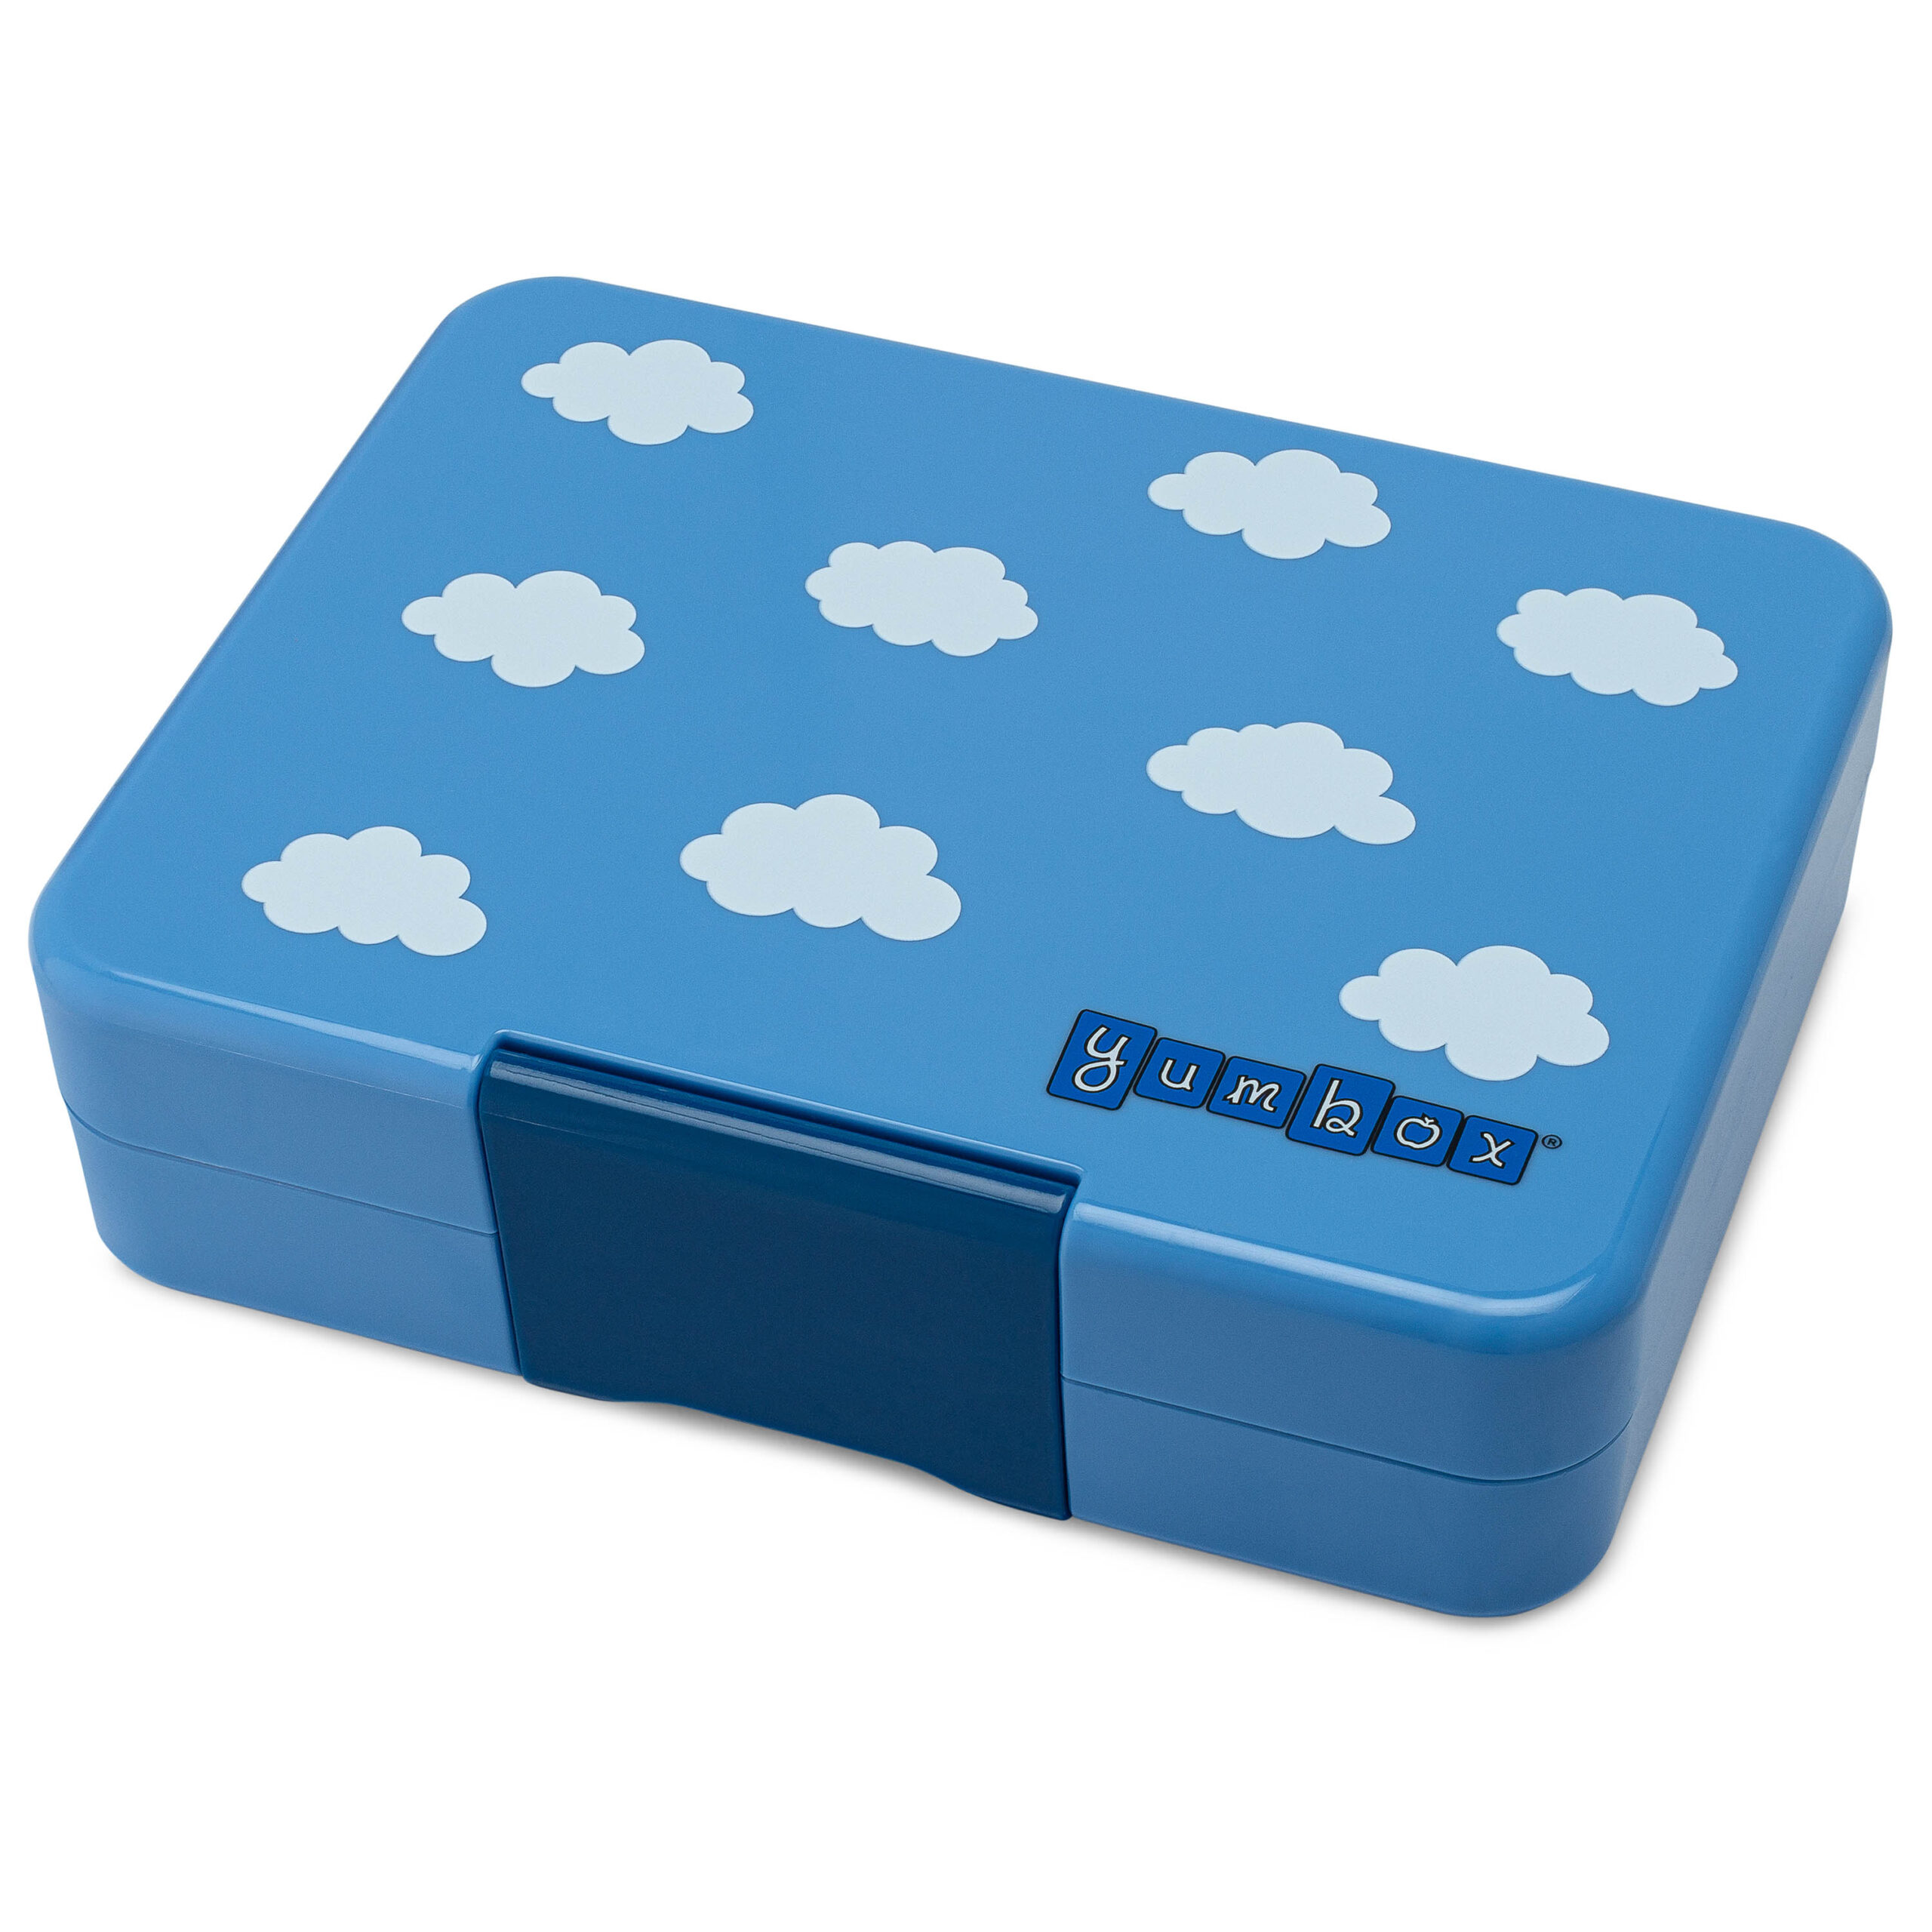 https://yumboxmexico.com/wp-content/uploads/2023/01/Sky-Blue-Exterior-Clouds-1-scaled.jpg